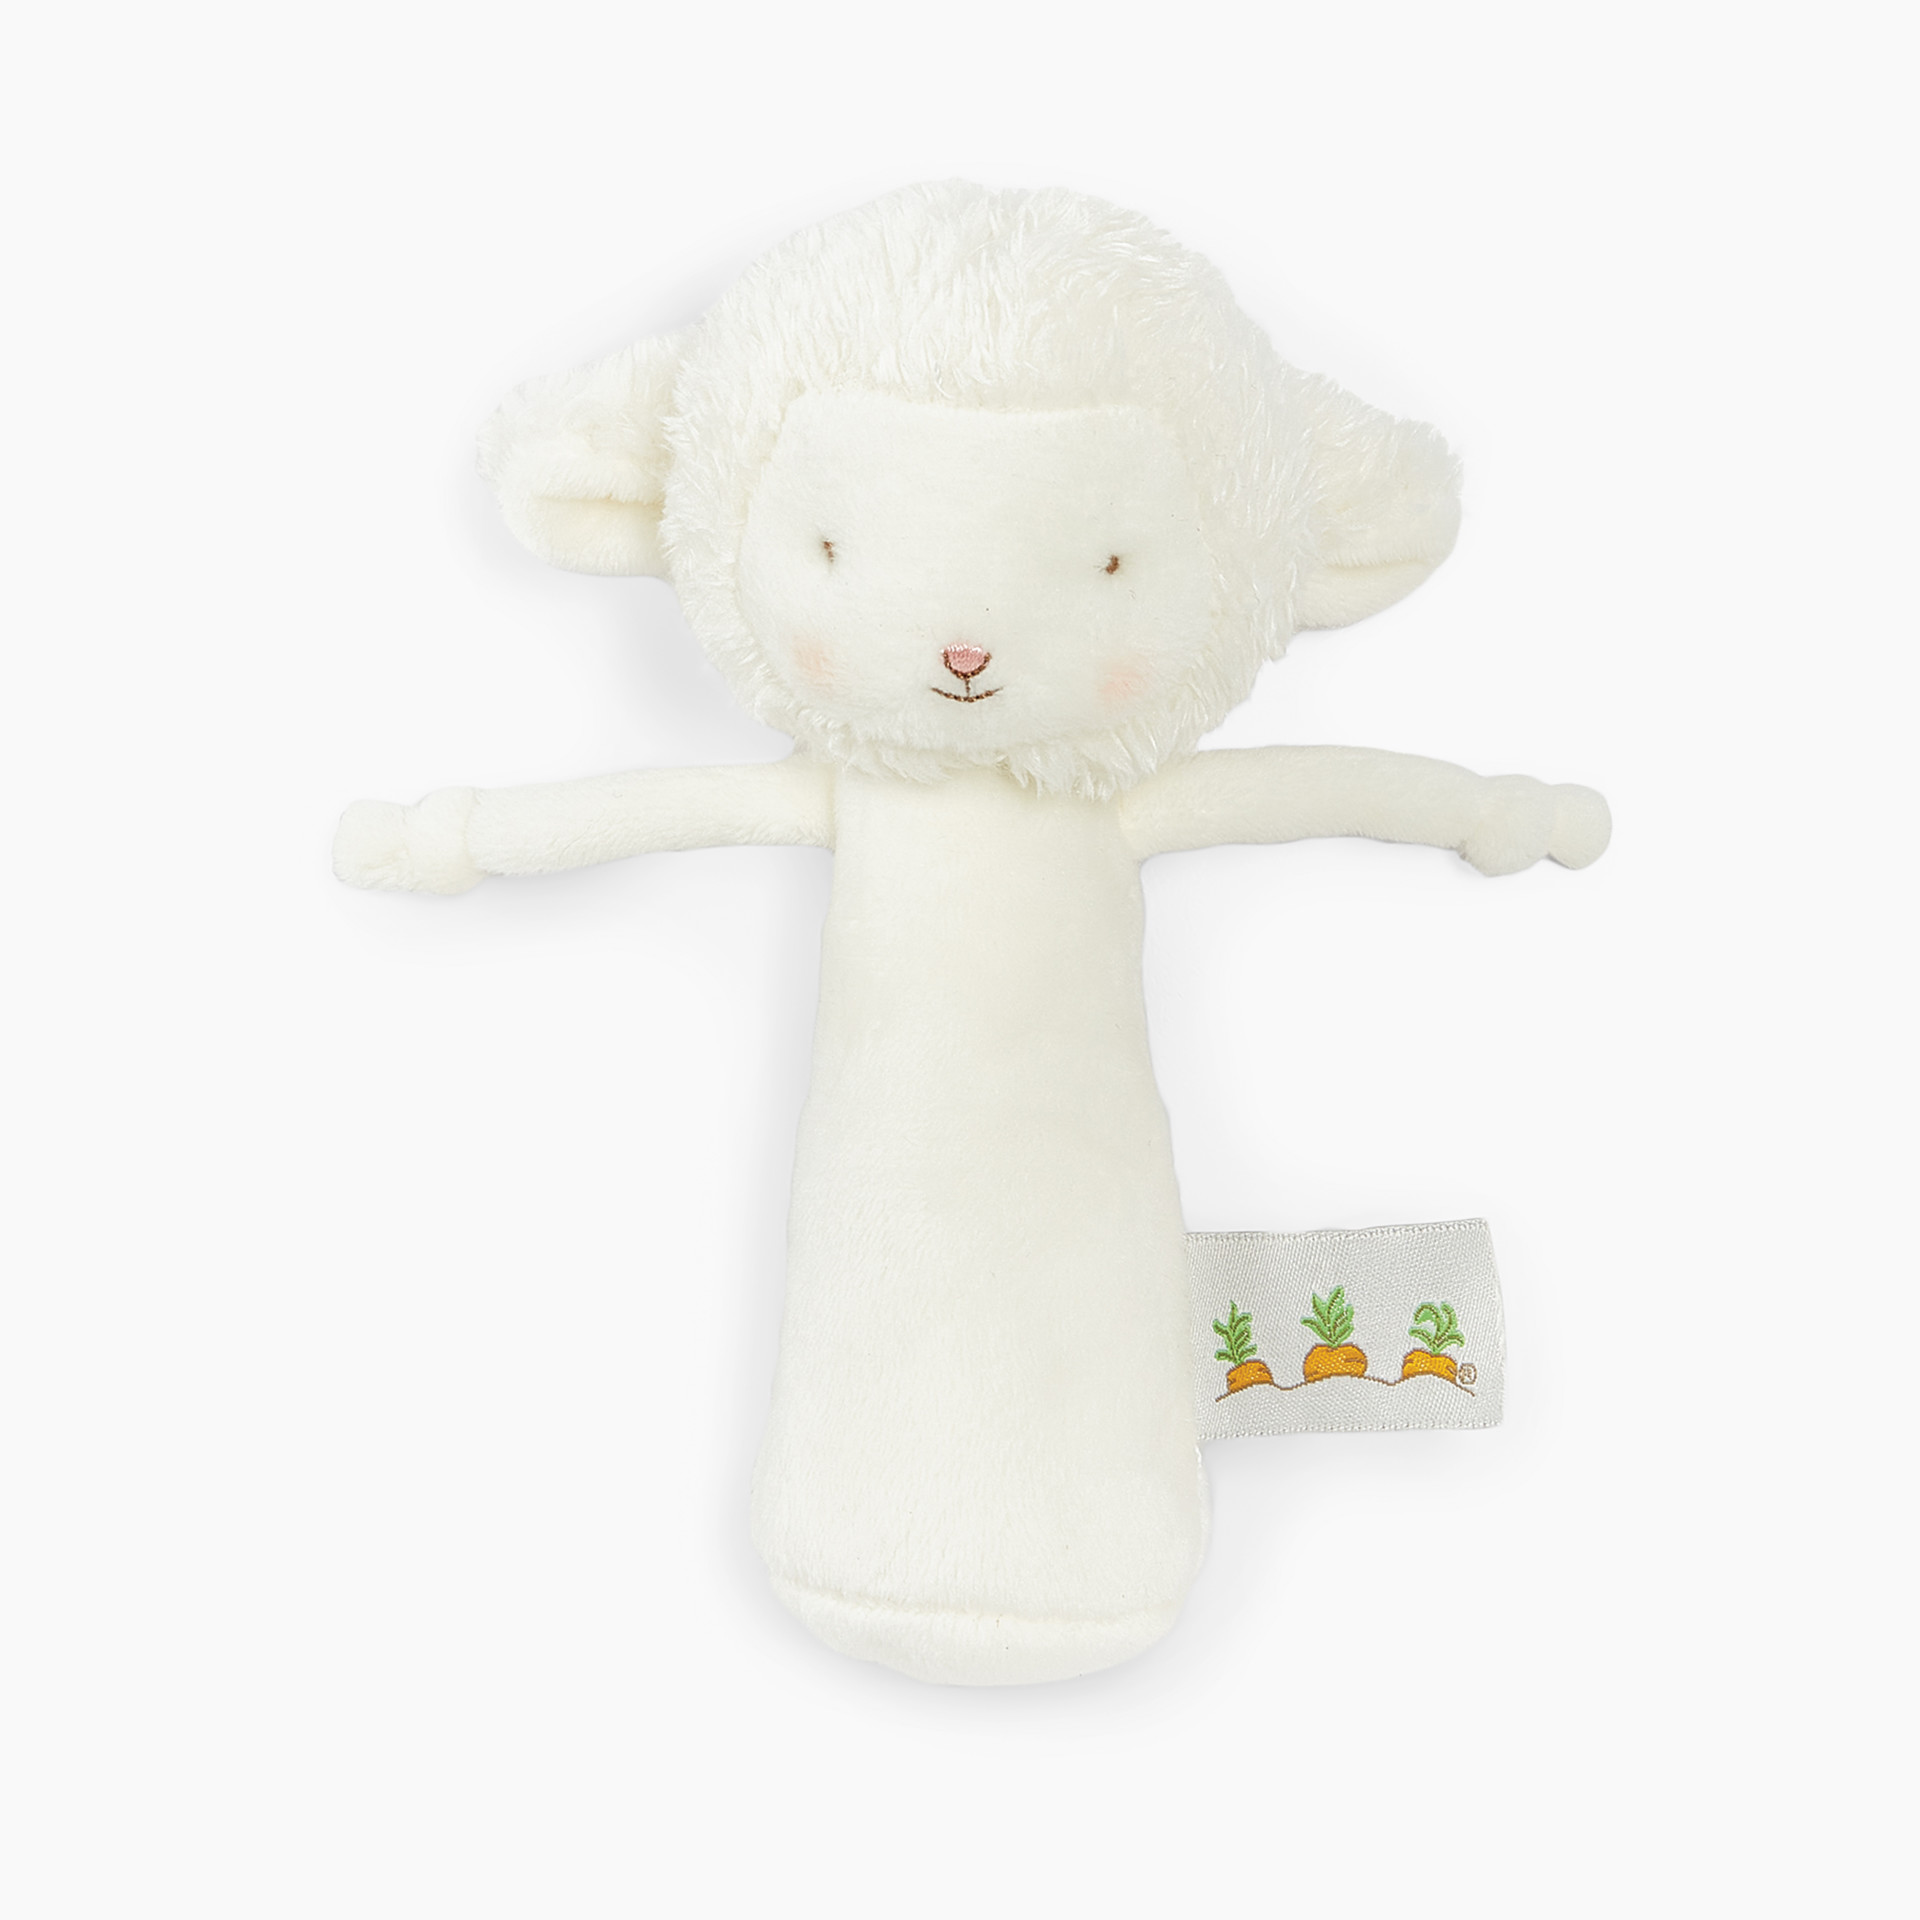 Friendly Chime Baby Rattle - Gray Bunny